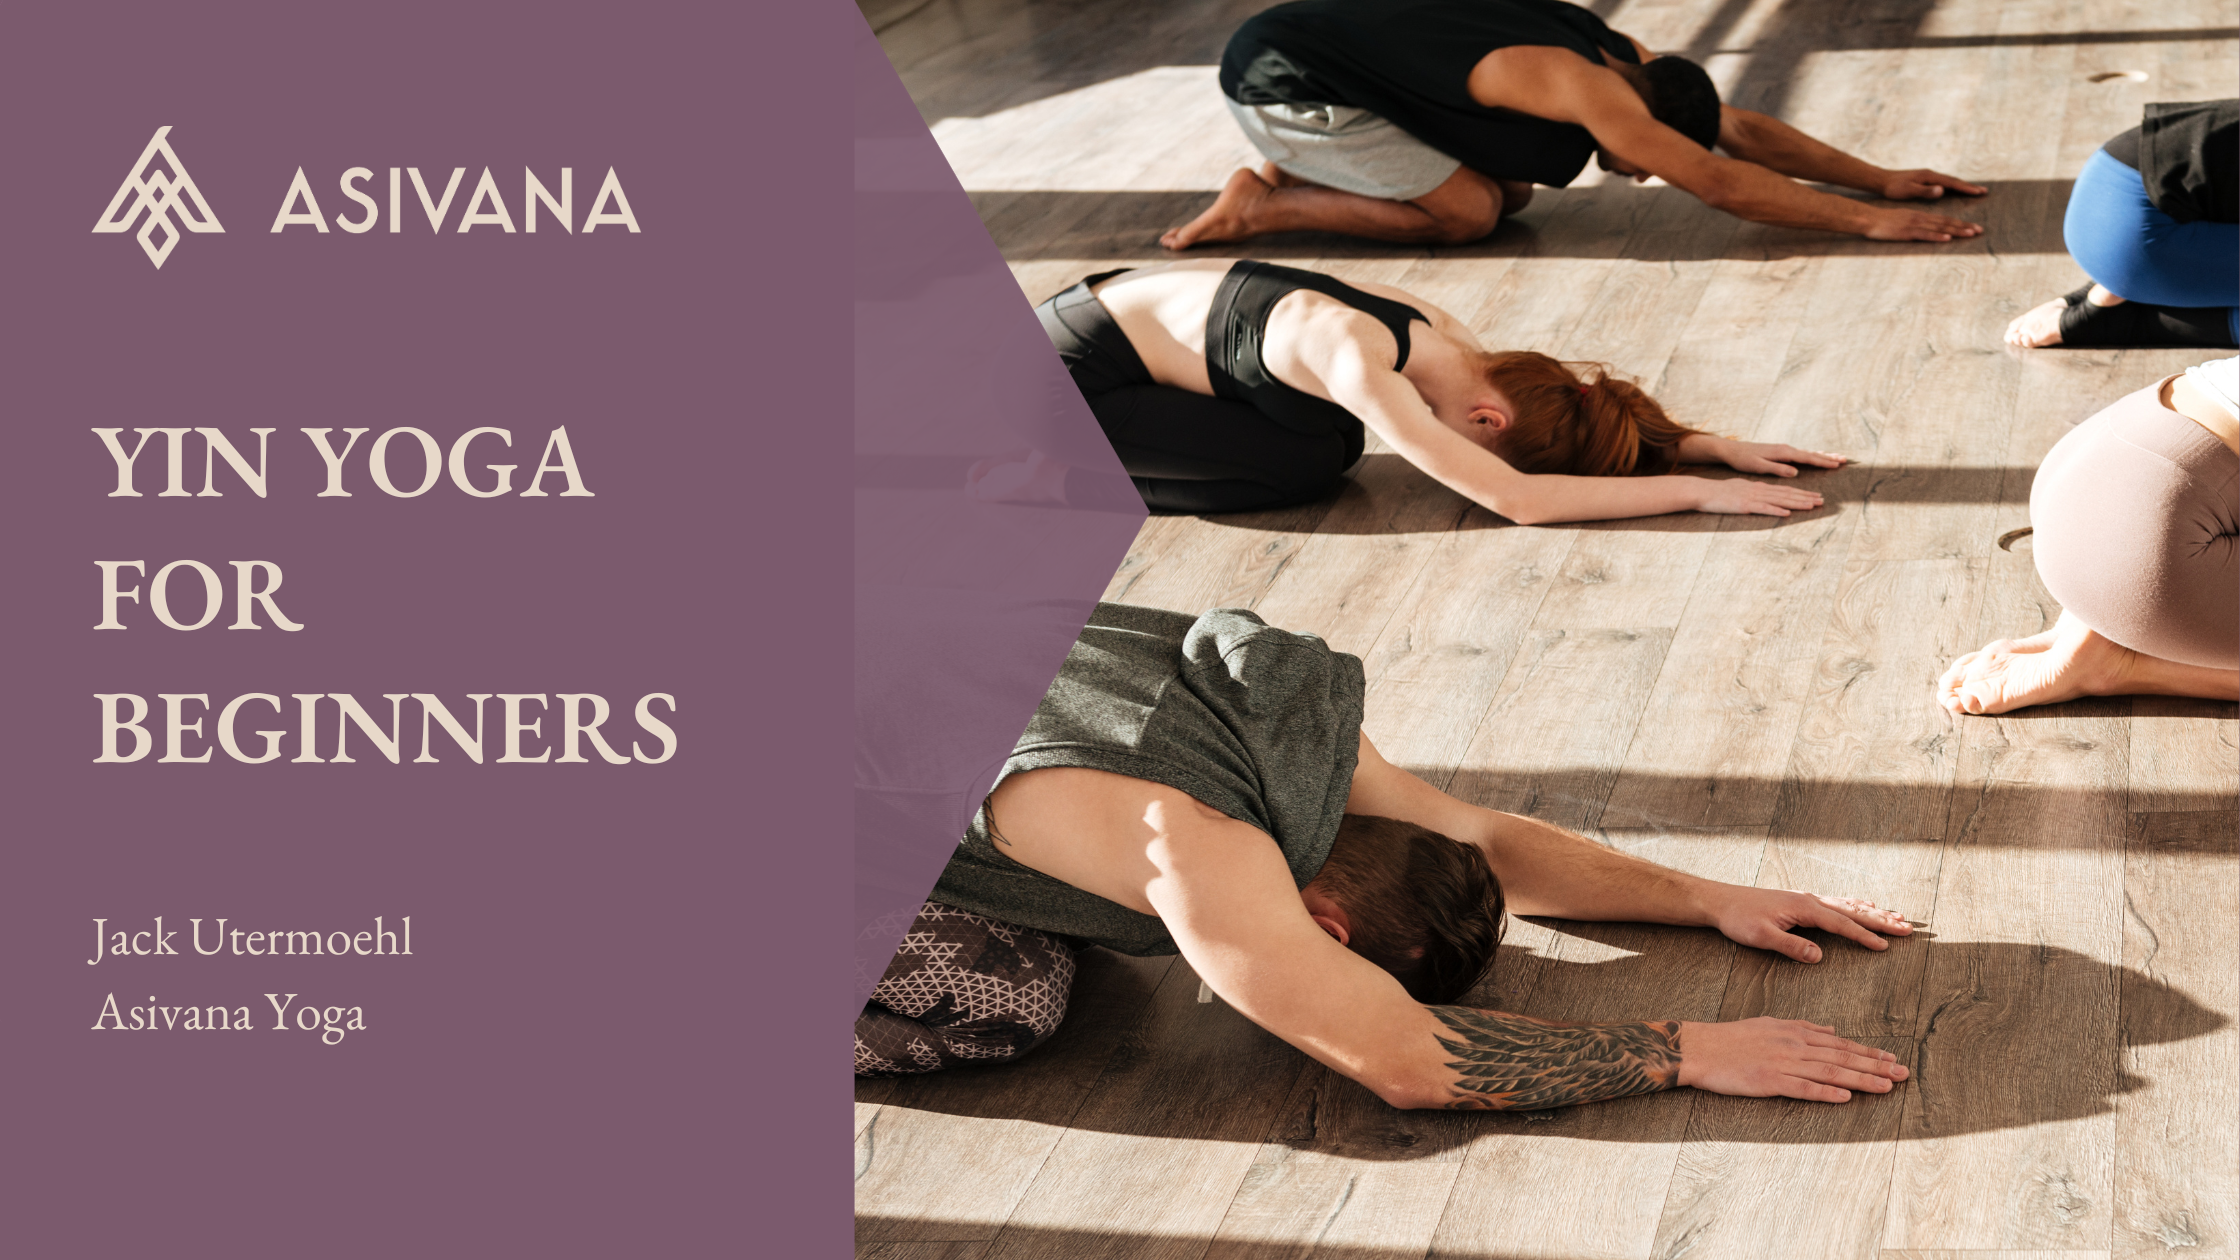 Yin Yoga: Poses, Benefits and More - Life Extension